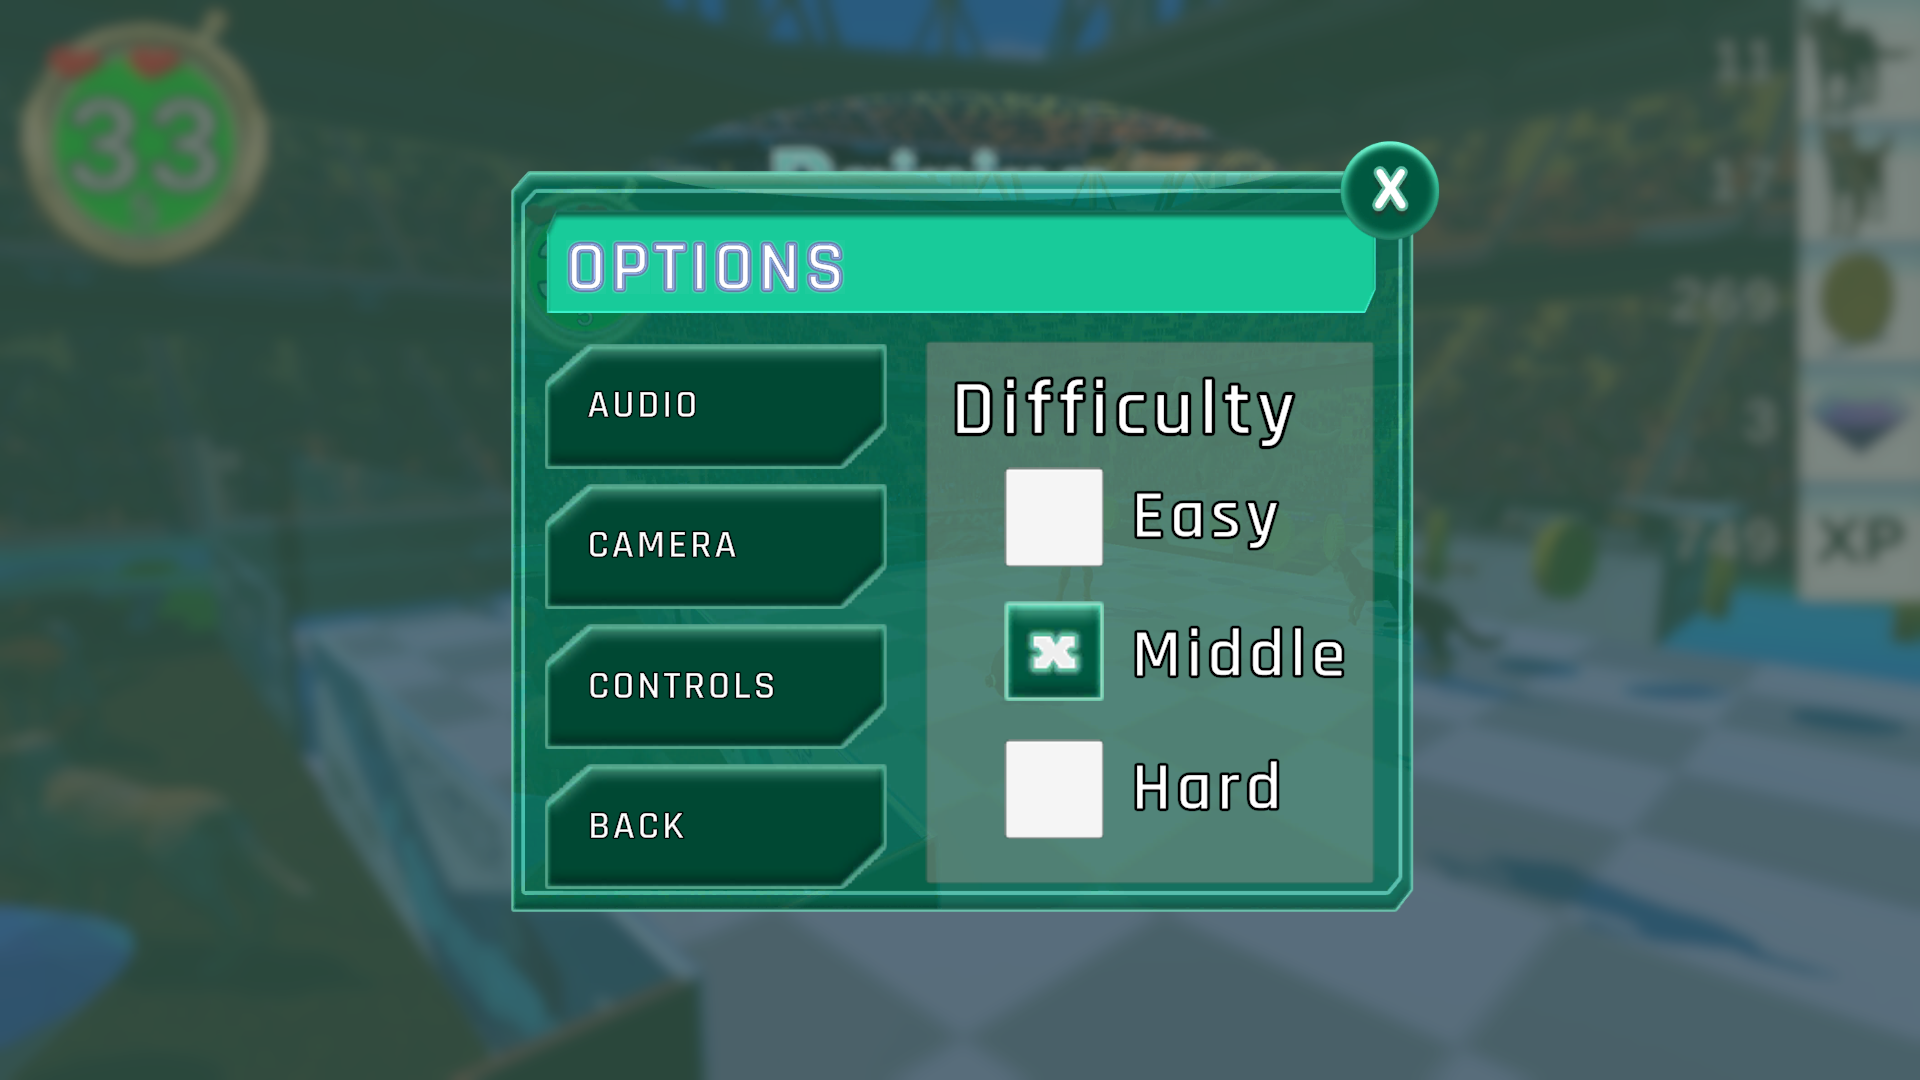 Settings and Options